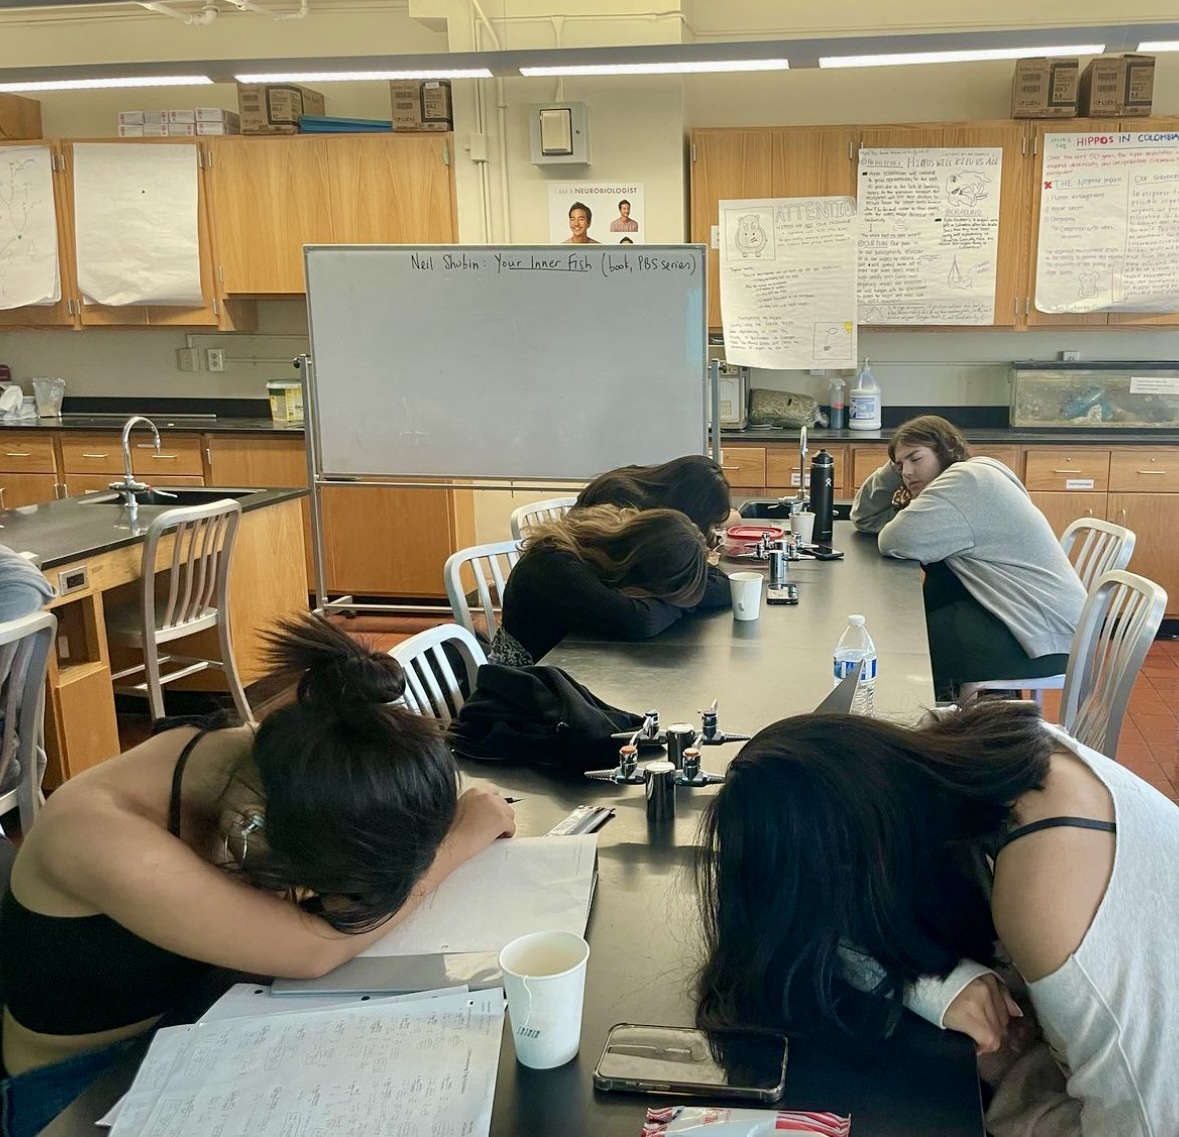 The+Bronx+Science+Mental+Health+Association%2C+a+club+formed+in+response+to+the+academic+pressures+of+school%2C+aims+to+improve+students+well-being+by+developing+coping+strategies.+They+often+spends+their+meetings+meditating%2C+as+seen+here.+%28Photo+Credit%3A+Bronx+Science+MHA+Instagram%3B+used+by+permission%29